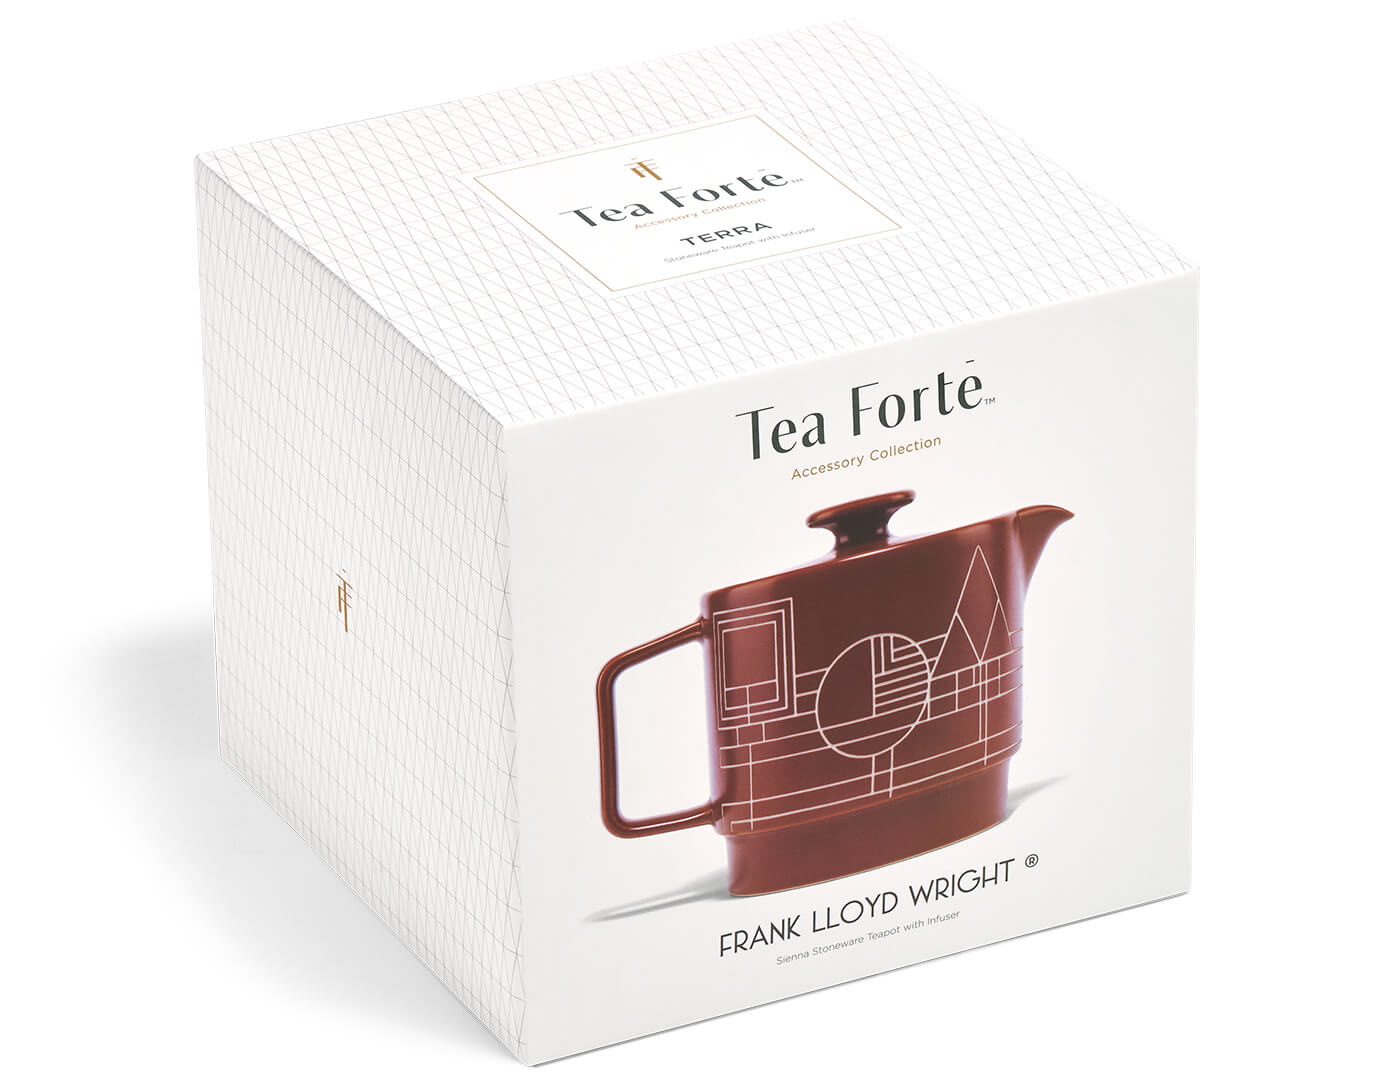 Terra stoneware Teapot with infuser box, front